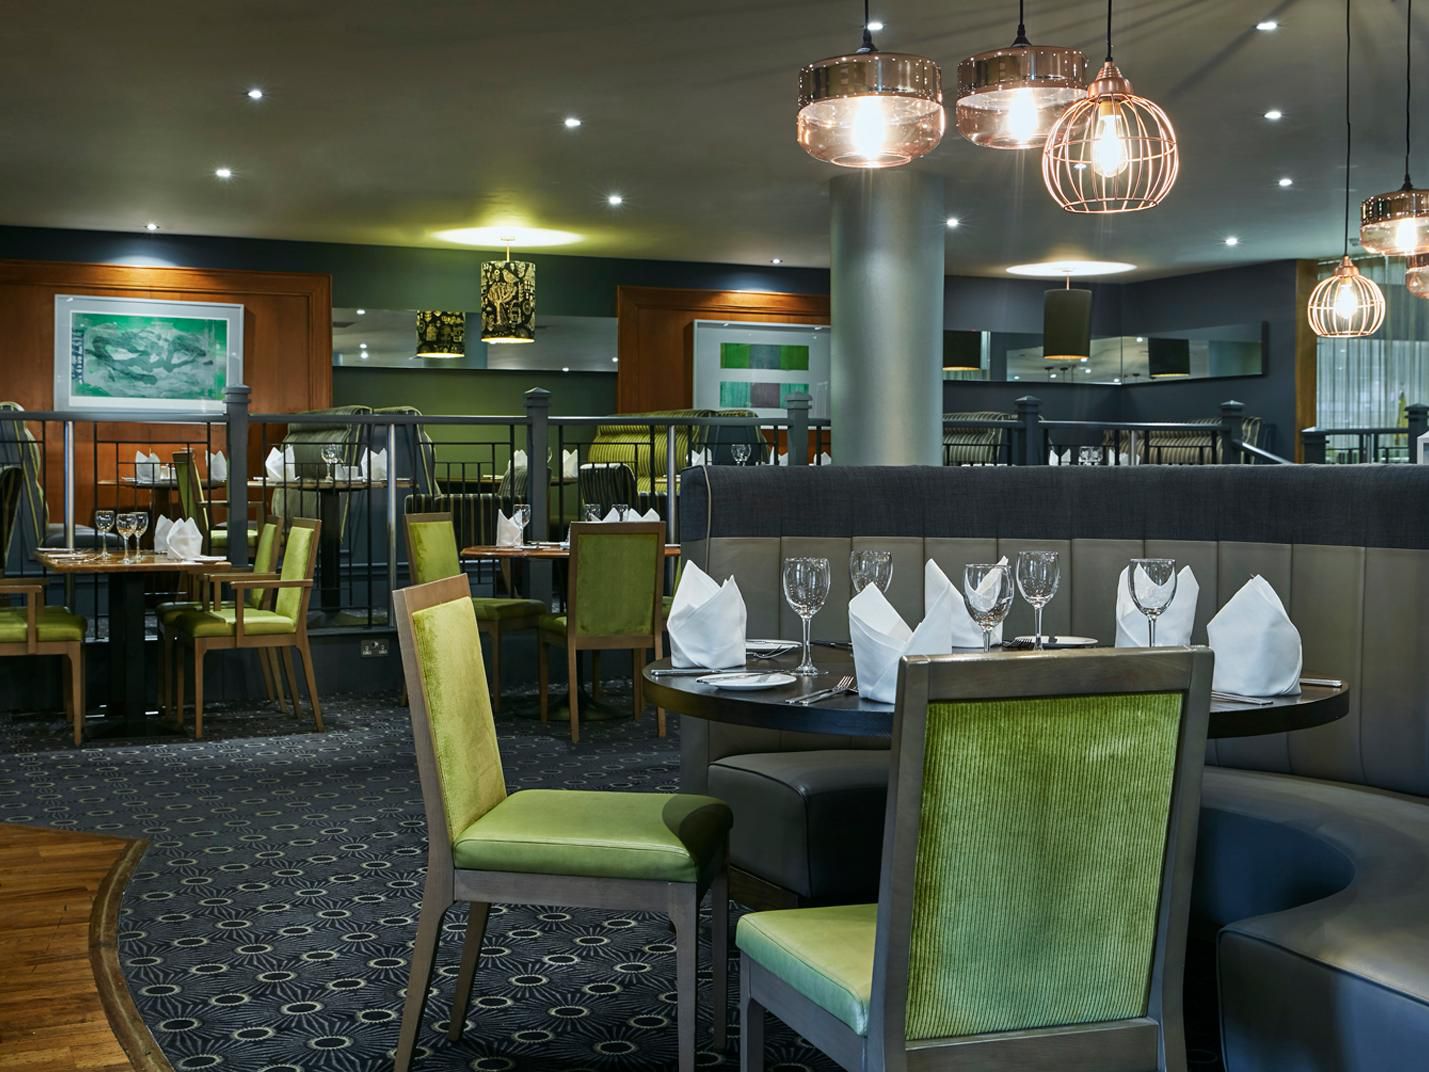 Crowne Plaza Belfast boasts extensive dining with The Green Room Restaurant, Spice Club Indian Restaurant & The RiverBar Lounge & Bistro. A la Carte dining & all-day casual dining will be provided in The River Bar lounge in a relaxed setting. For more information, call 028 90923500.